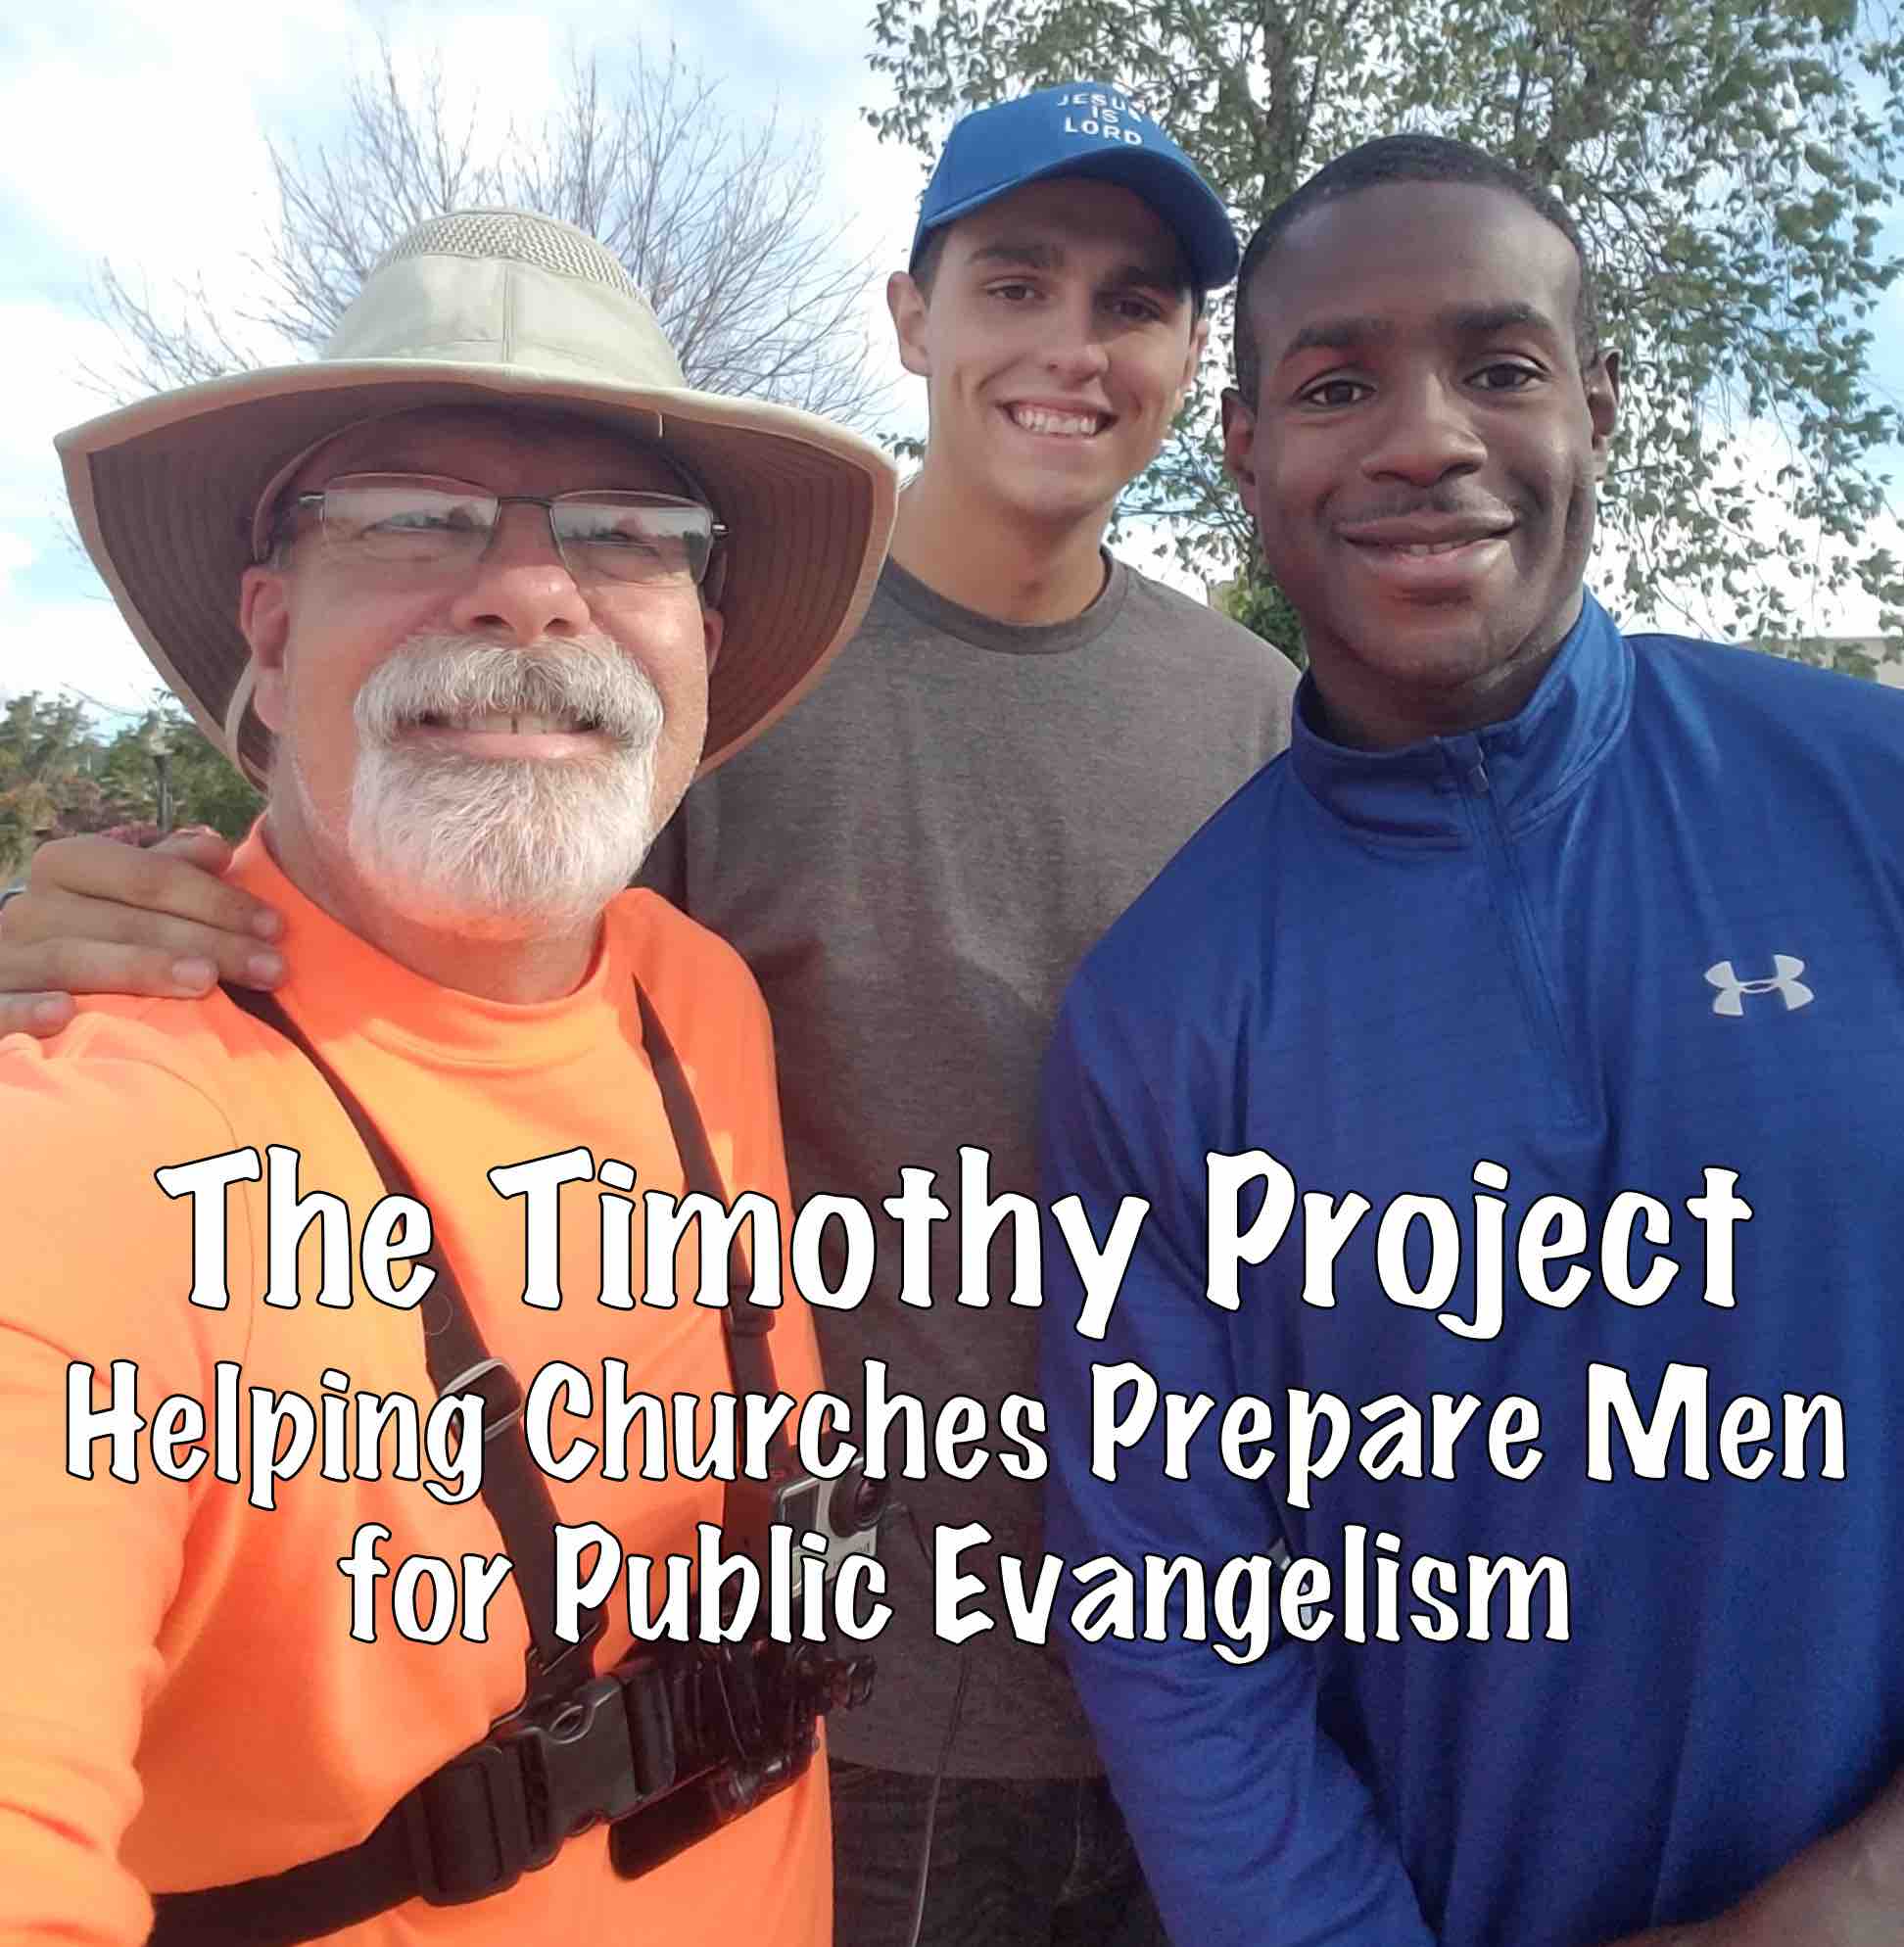 The Timothy Project: Helping Churches Prepare Men for Public Evangelism